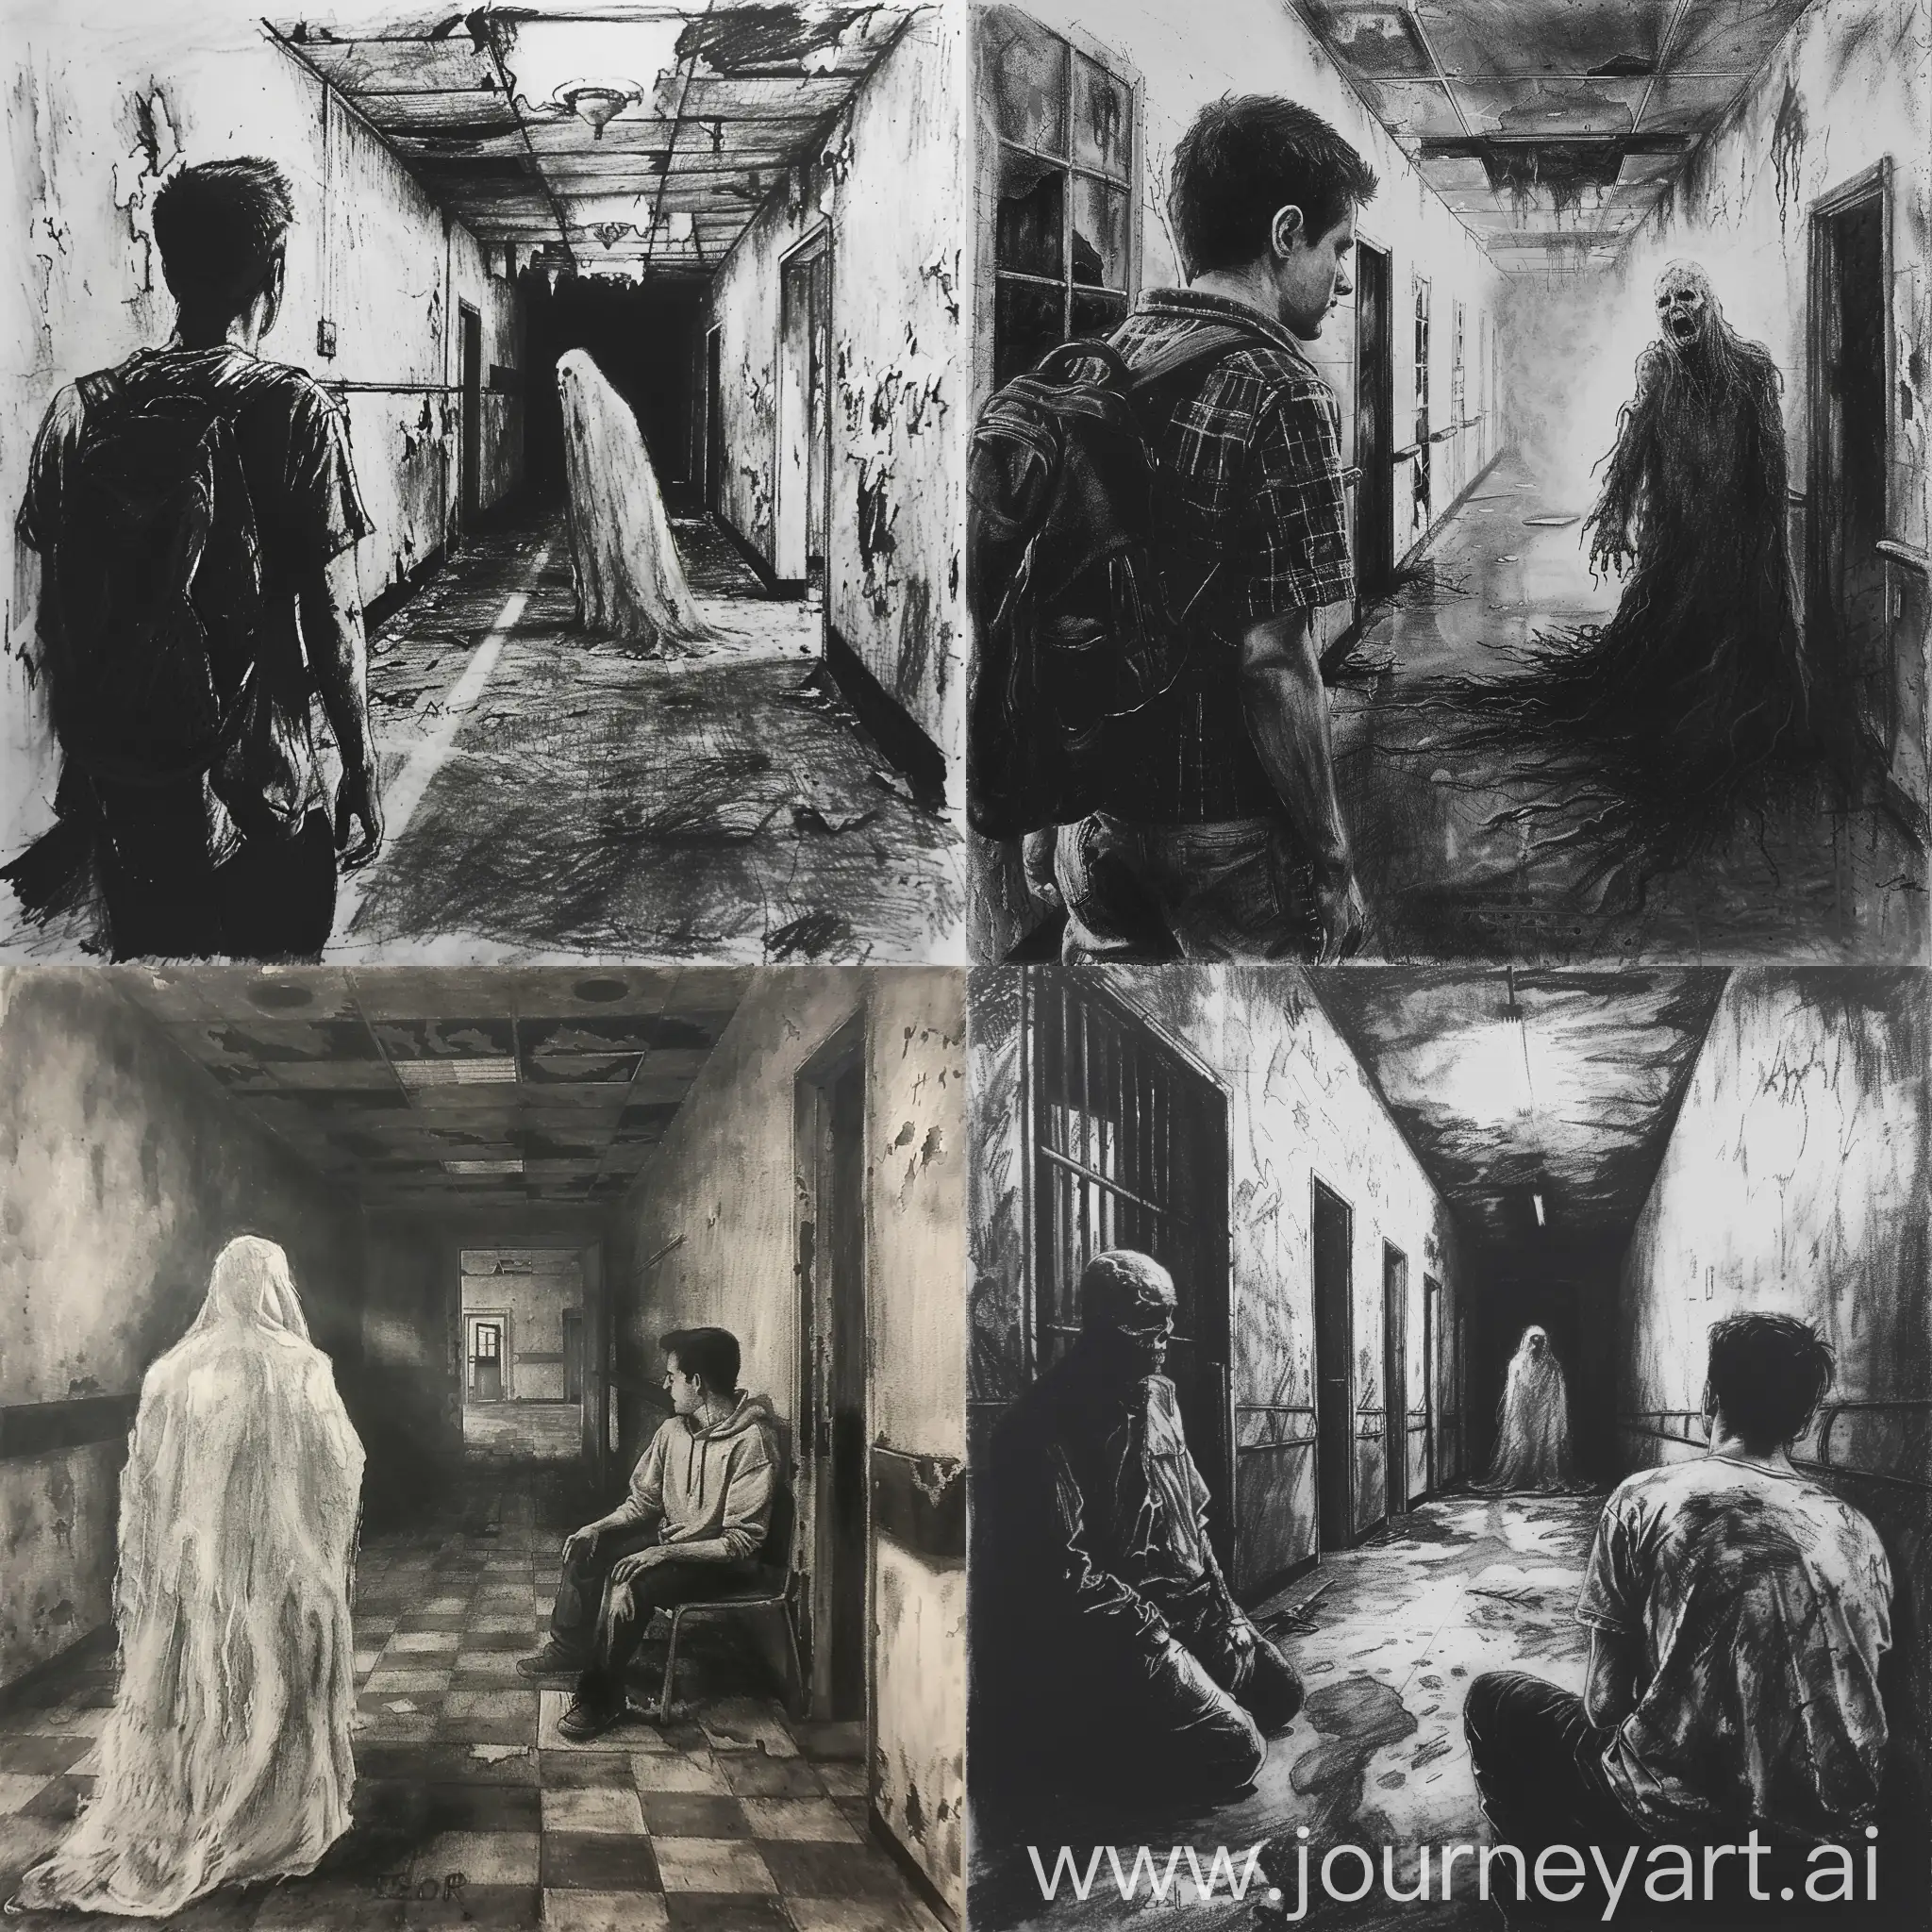 A creepy charcoal drawing about a guy meeting with a sinister ghost in an abandoned mental hospital